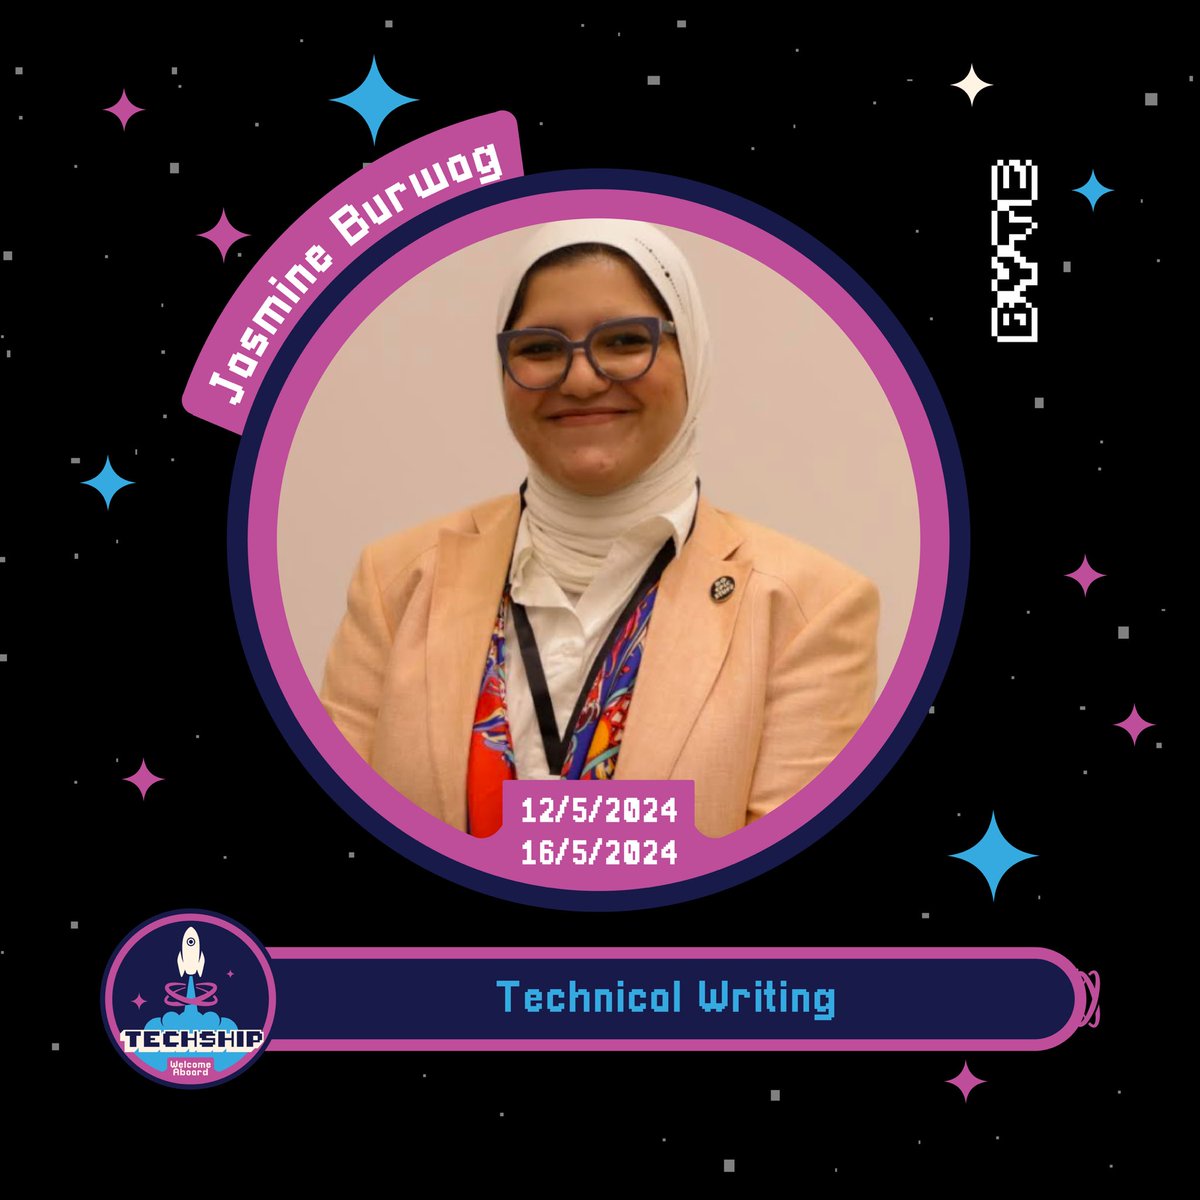 TechShip 2nd Trip 🚀 
Technical Writing 
🎙️ Lead by: Jasmine Burwag 
🗓️ Date: Sunday 12th of May - Thursday 16th of May 
🕟 Time: 4:30 PM - 8:00 PM 

#TechShip 🚀 
Welcome Aboard! 

Funded by US State Department through Alumni Engagement innovation Fund (AEIF)